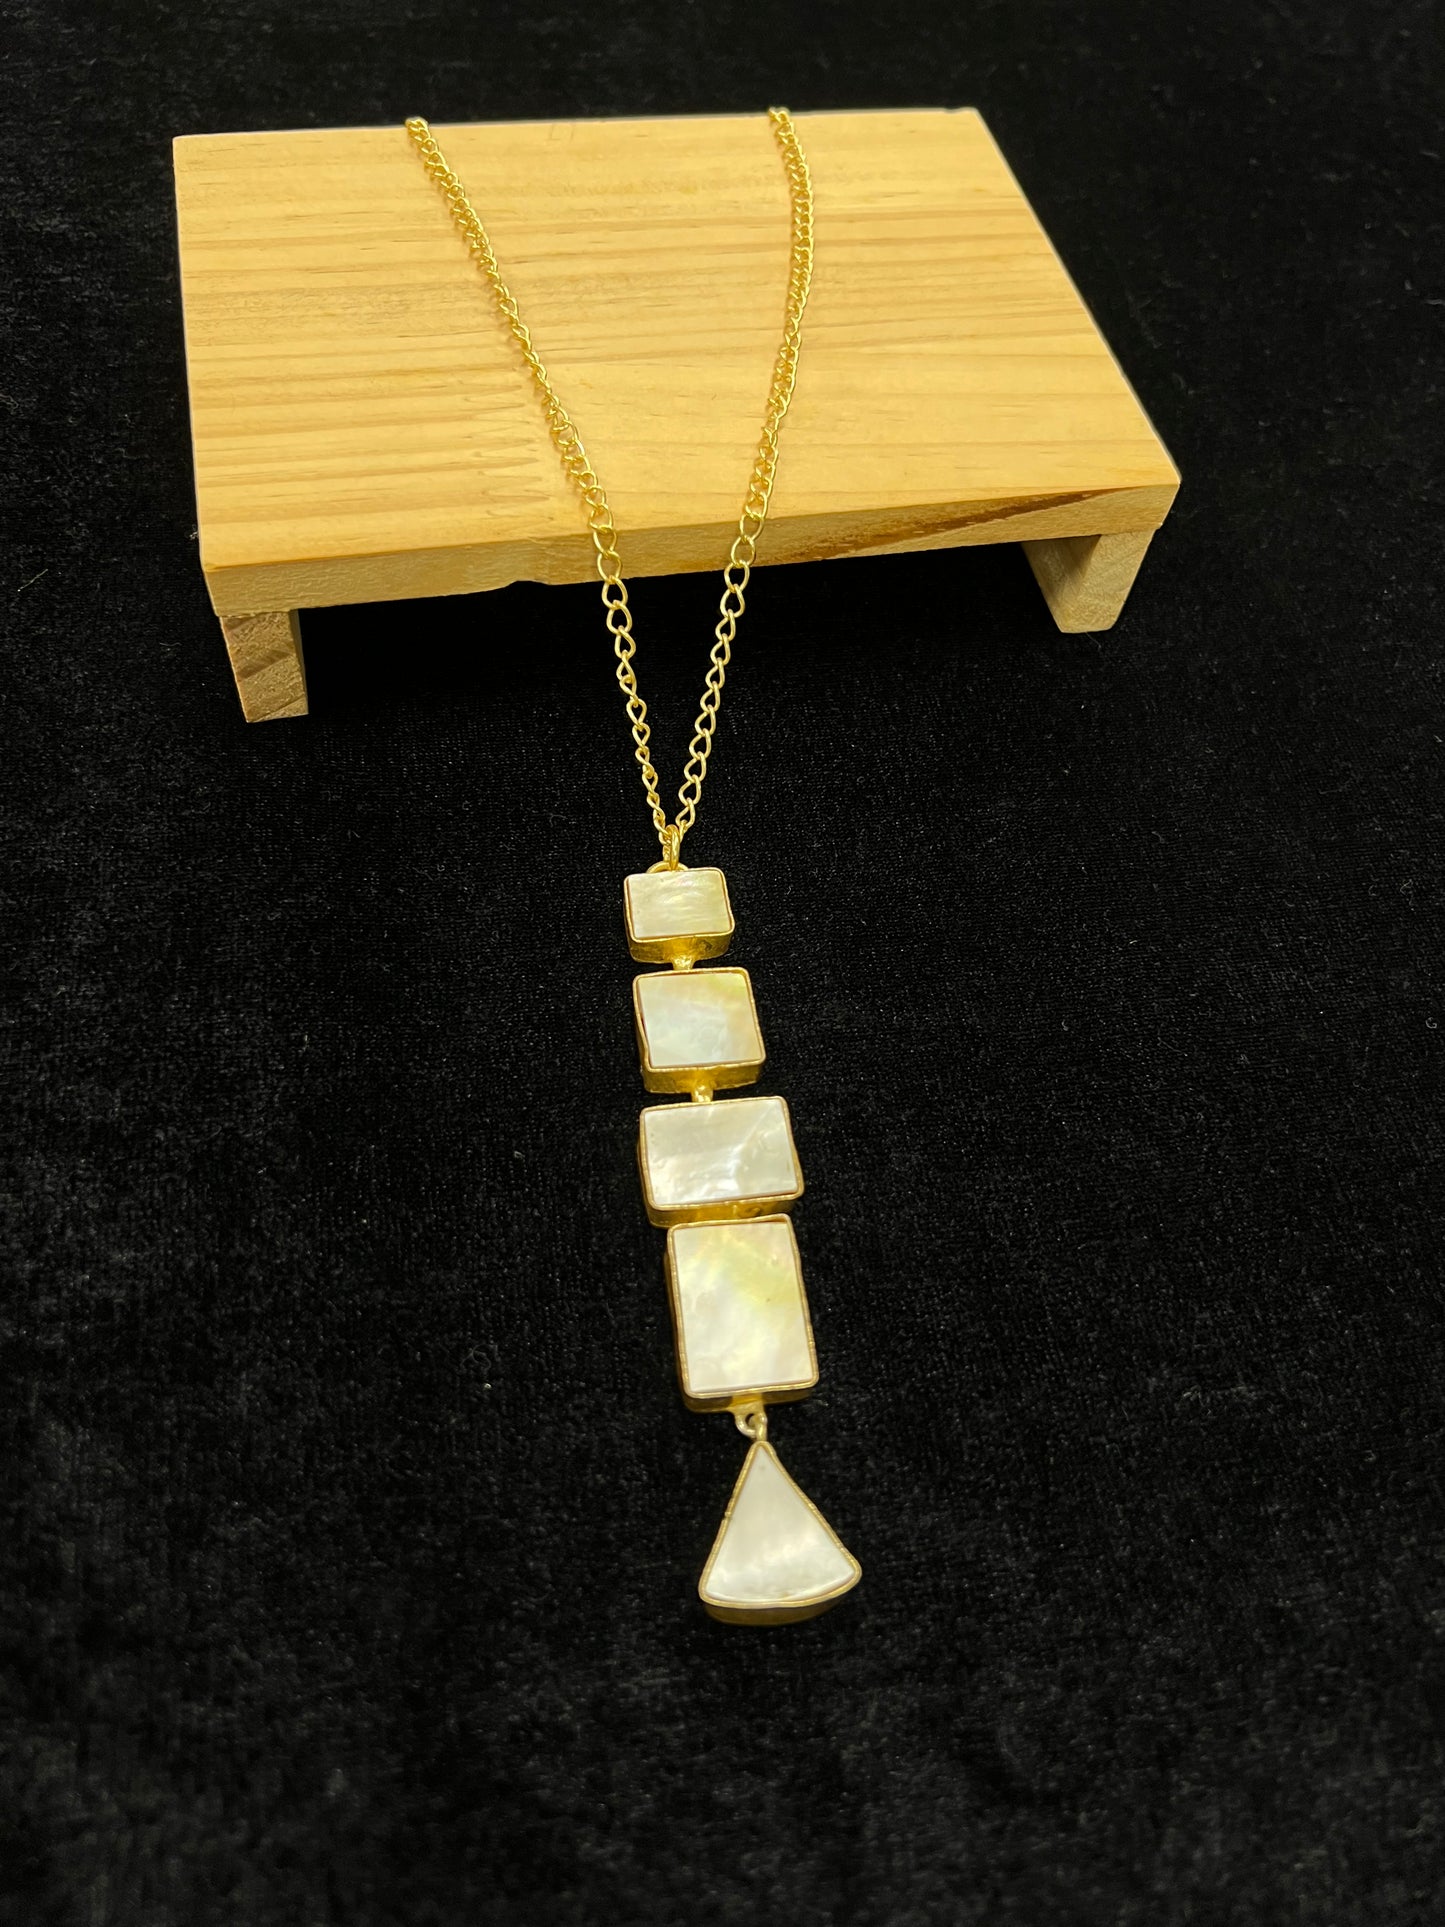 Pearl Ladder Pendant Necklace